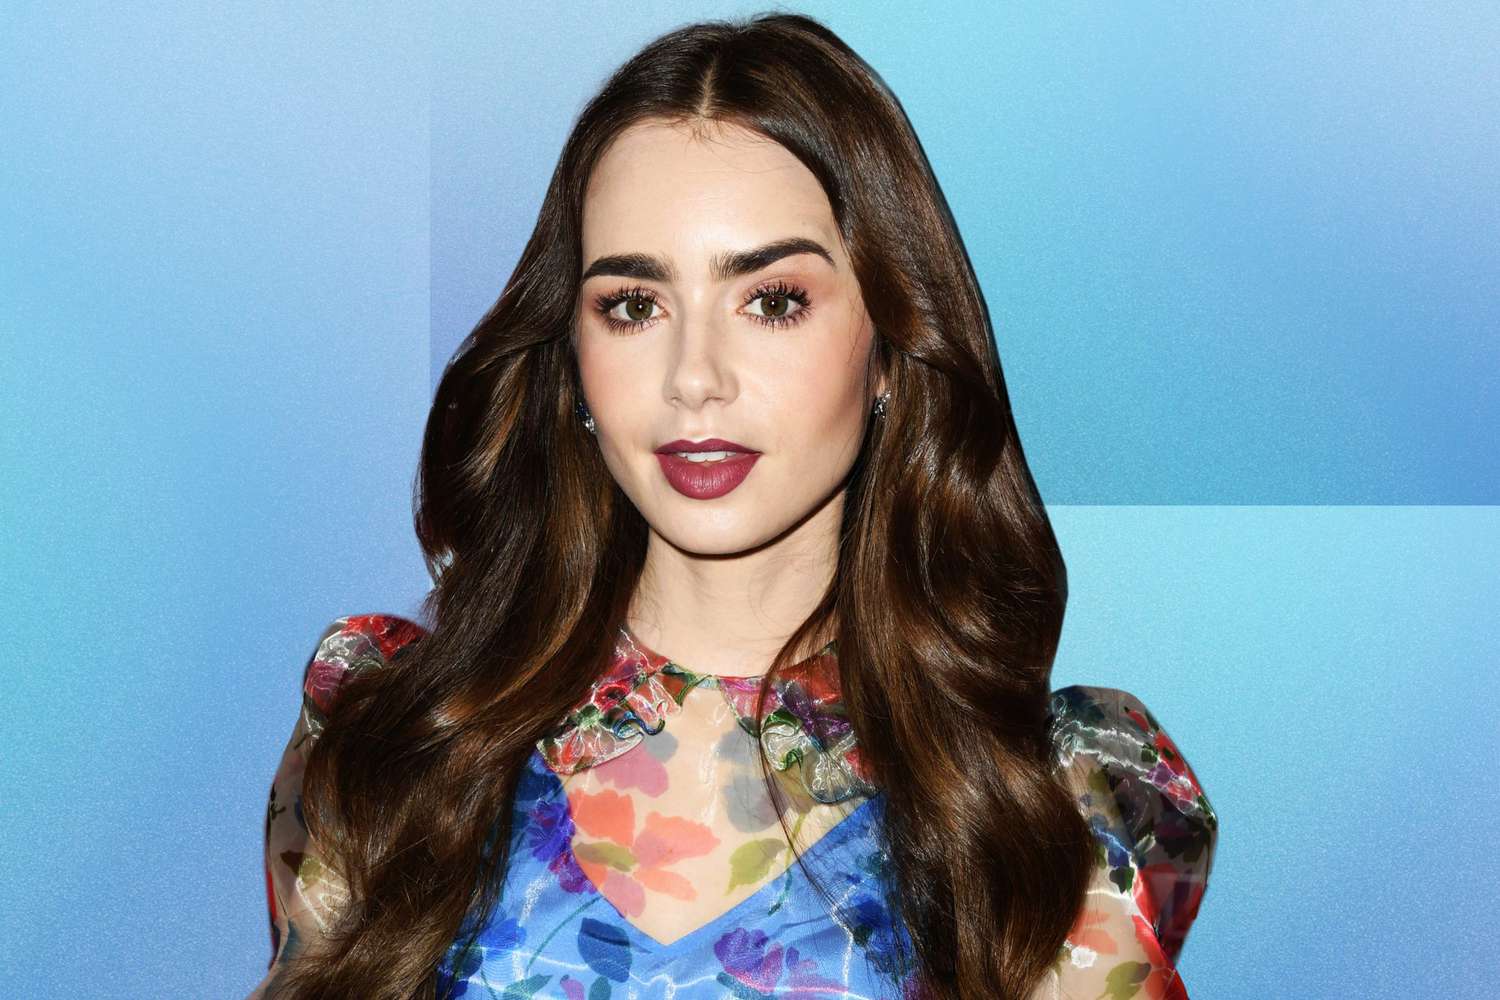 Lily Collins attends Les Misérables Photo Call at Linwood Dunn Theater on June 08, 2019 in Los Angeles, California.